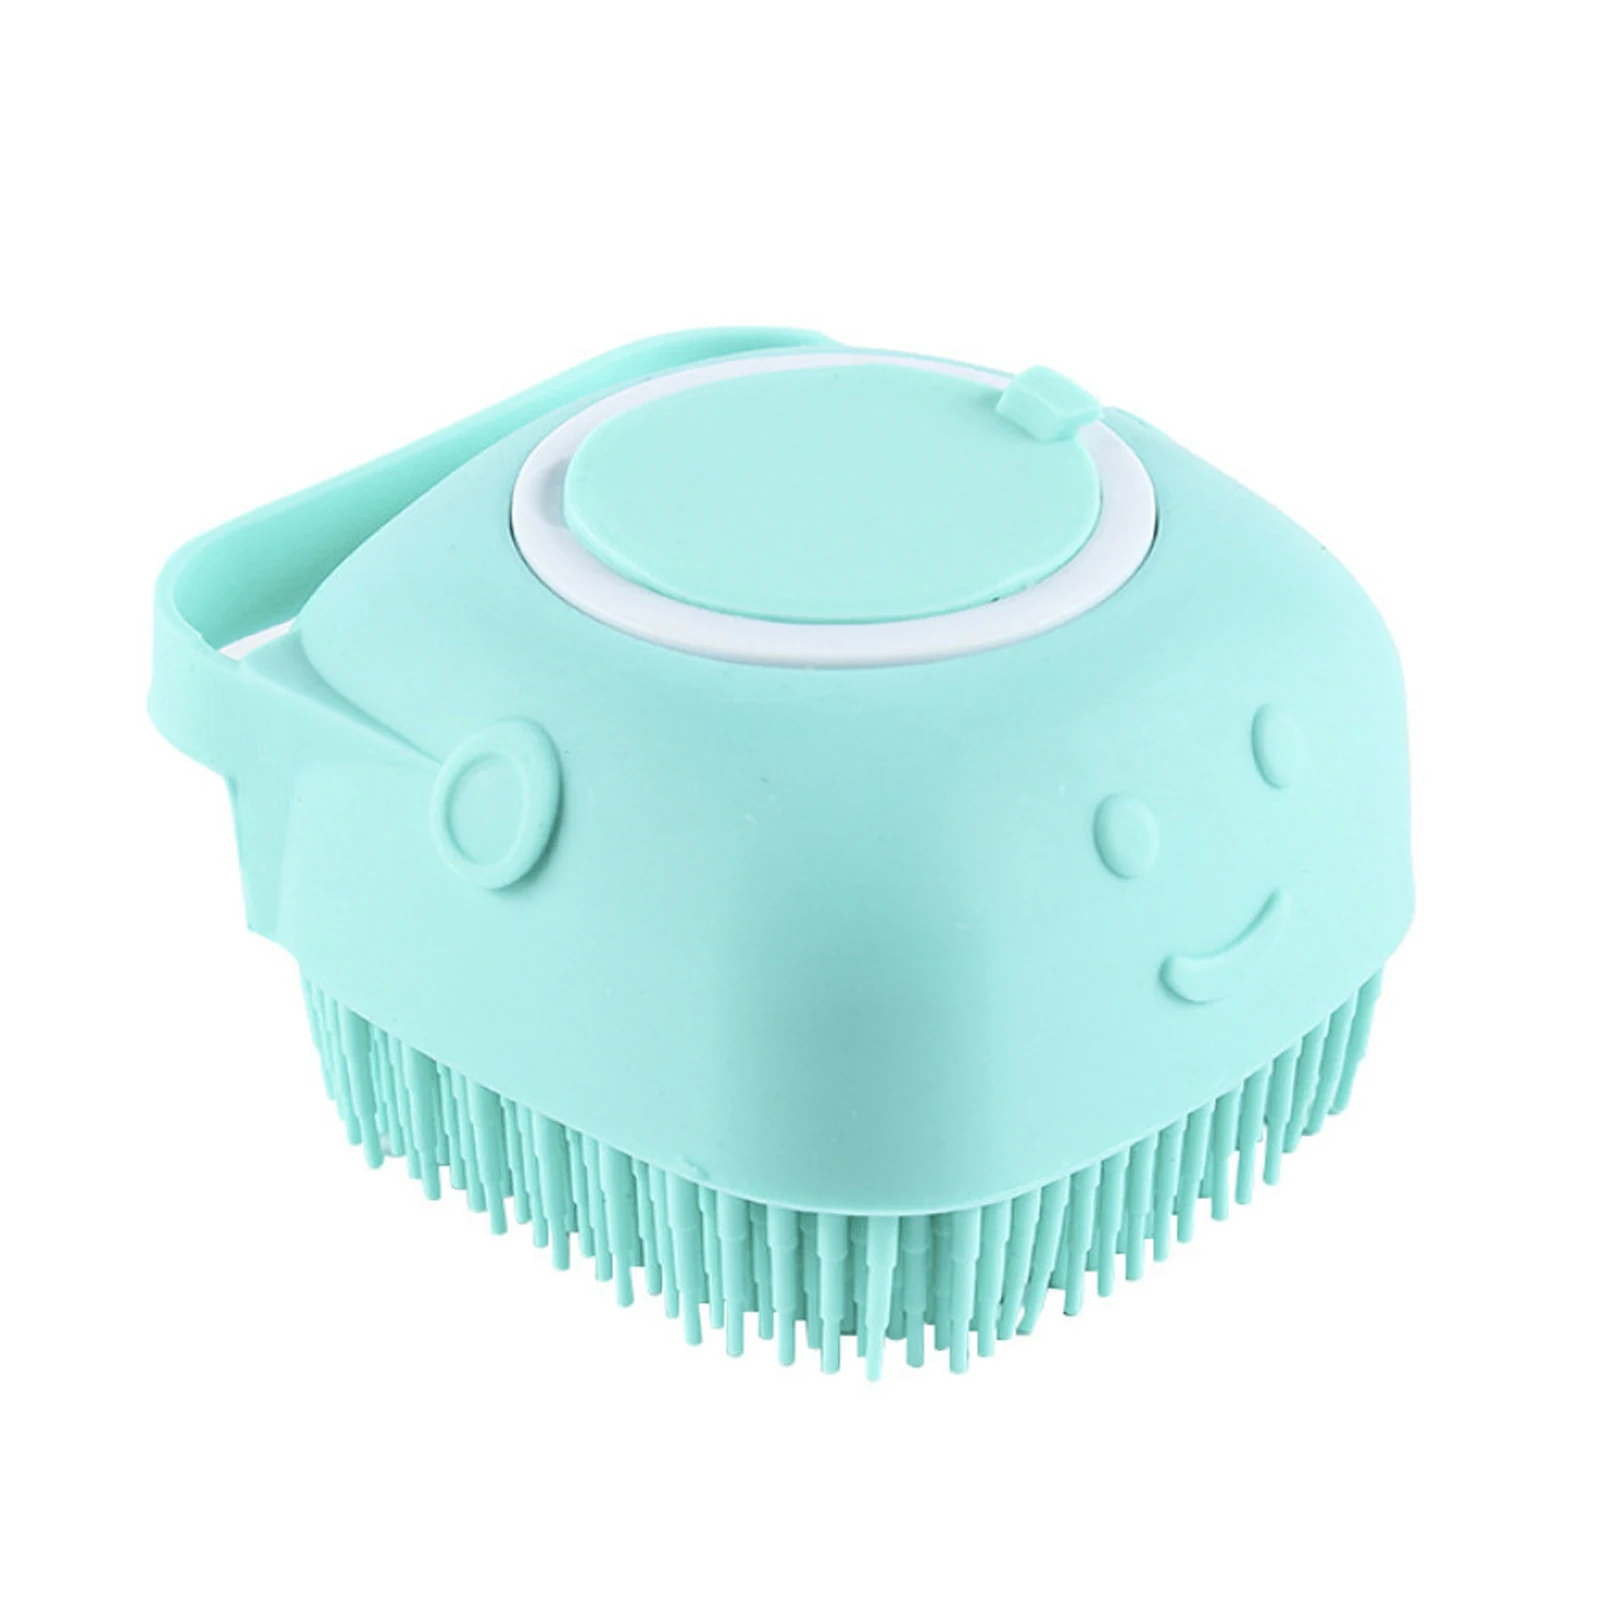 

Dog Cat Bath Brush Comb Cat Grooming Pet Shampoo Brush Comb Puppy Kitten Soothing Massage Tool For Showering Washing Pets